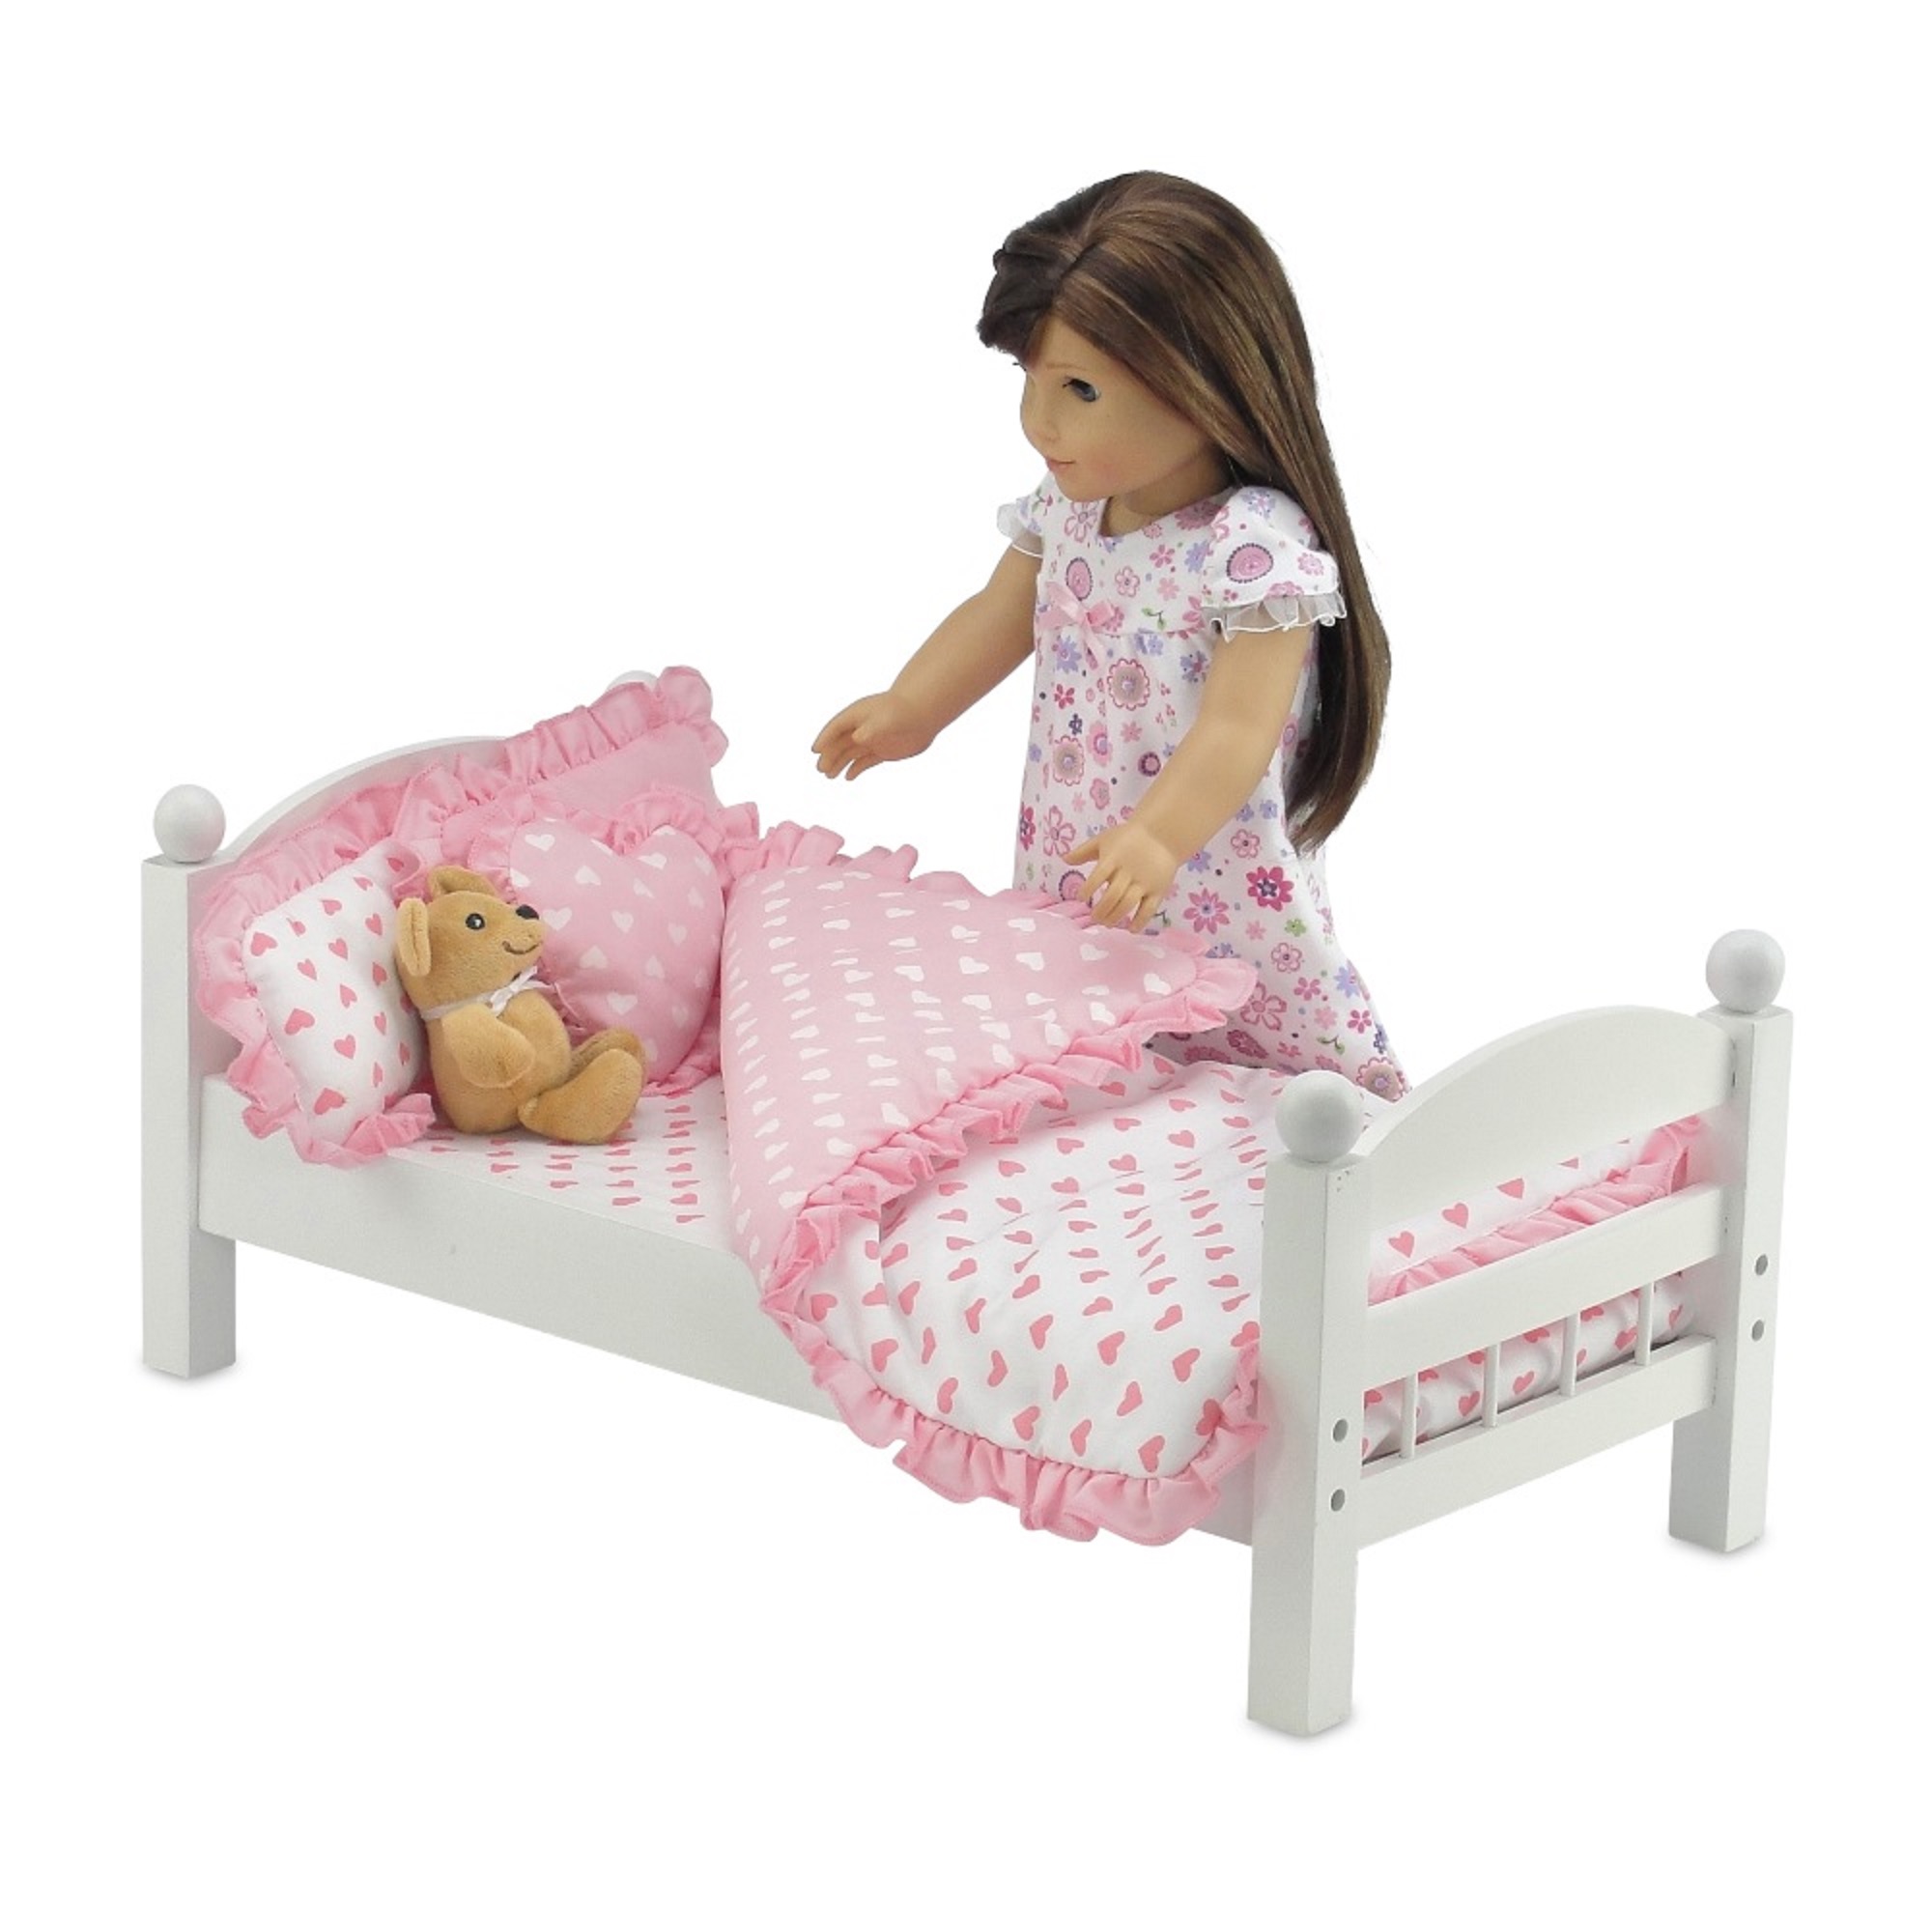 Emily Rose 18 Inch Doll Accessories | Reversible Pink Ruffled 5 Piece Doll Bedding Set | Fits 18" Doll Beds - image 5 of 7